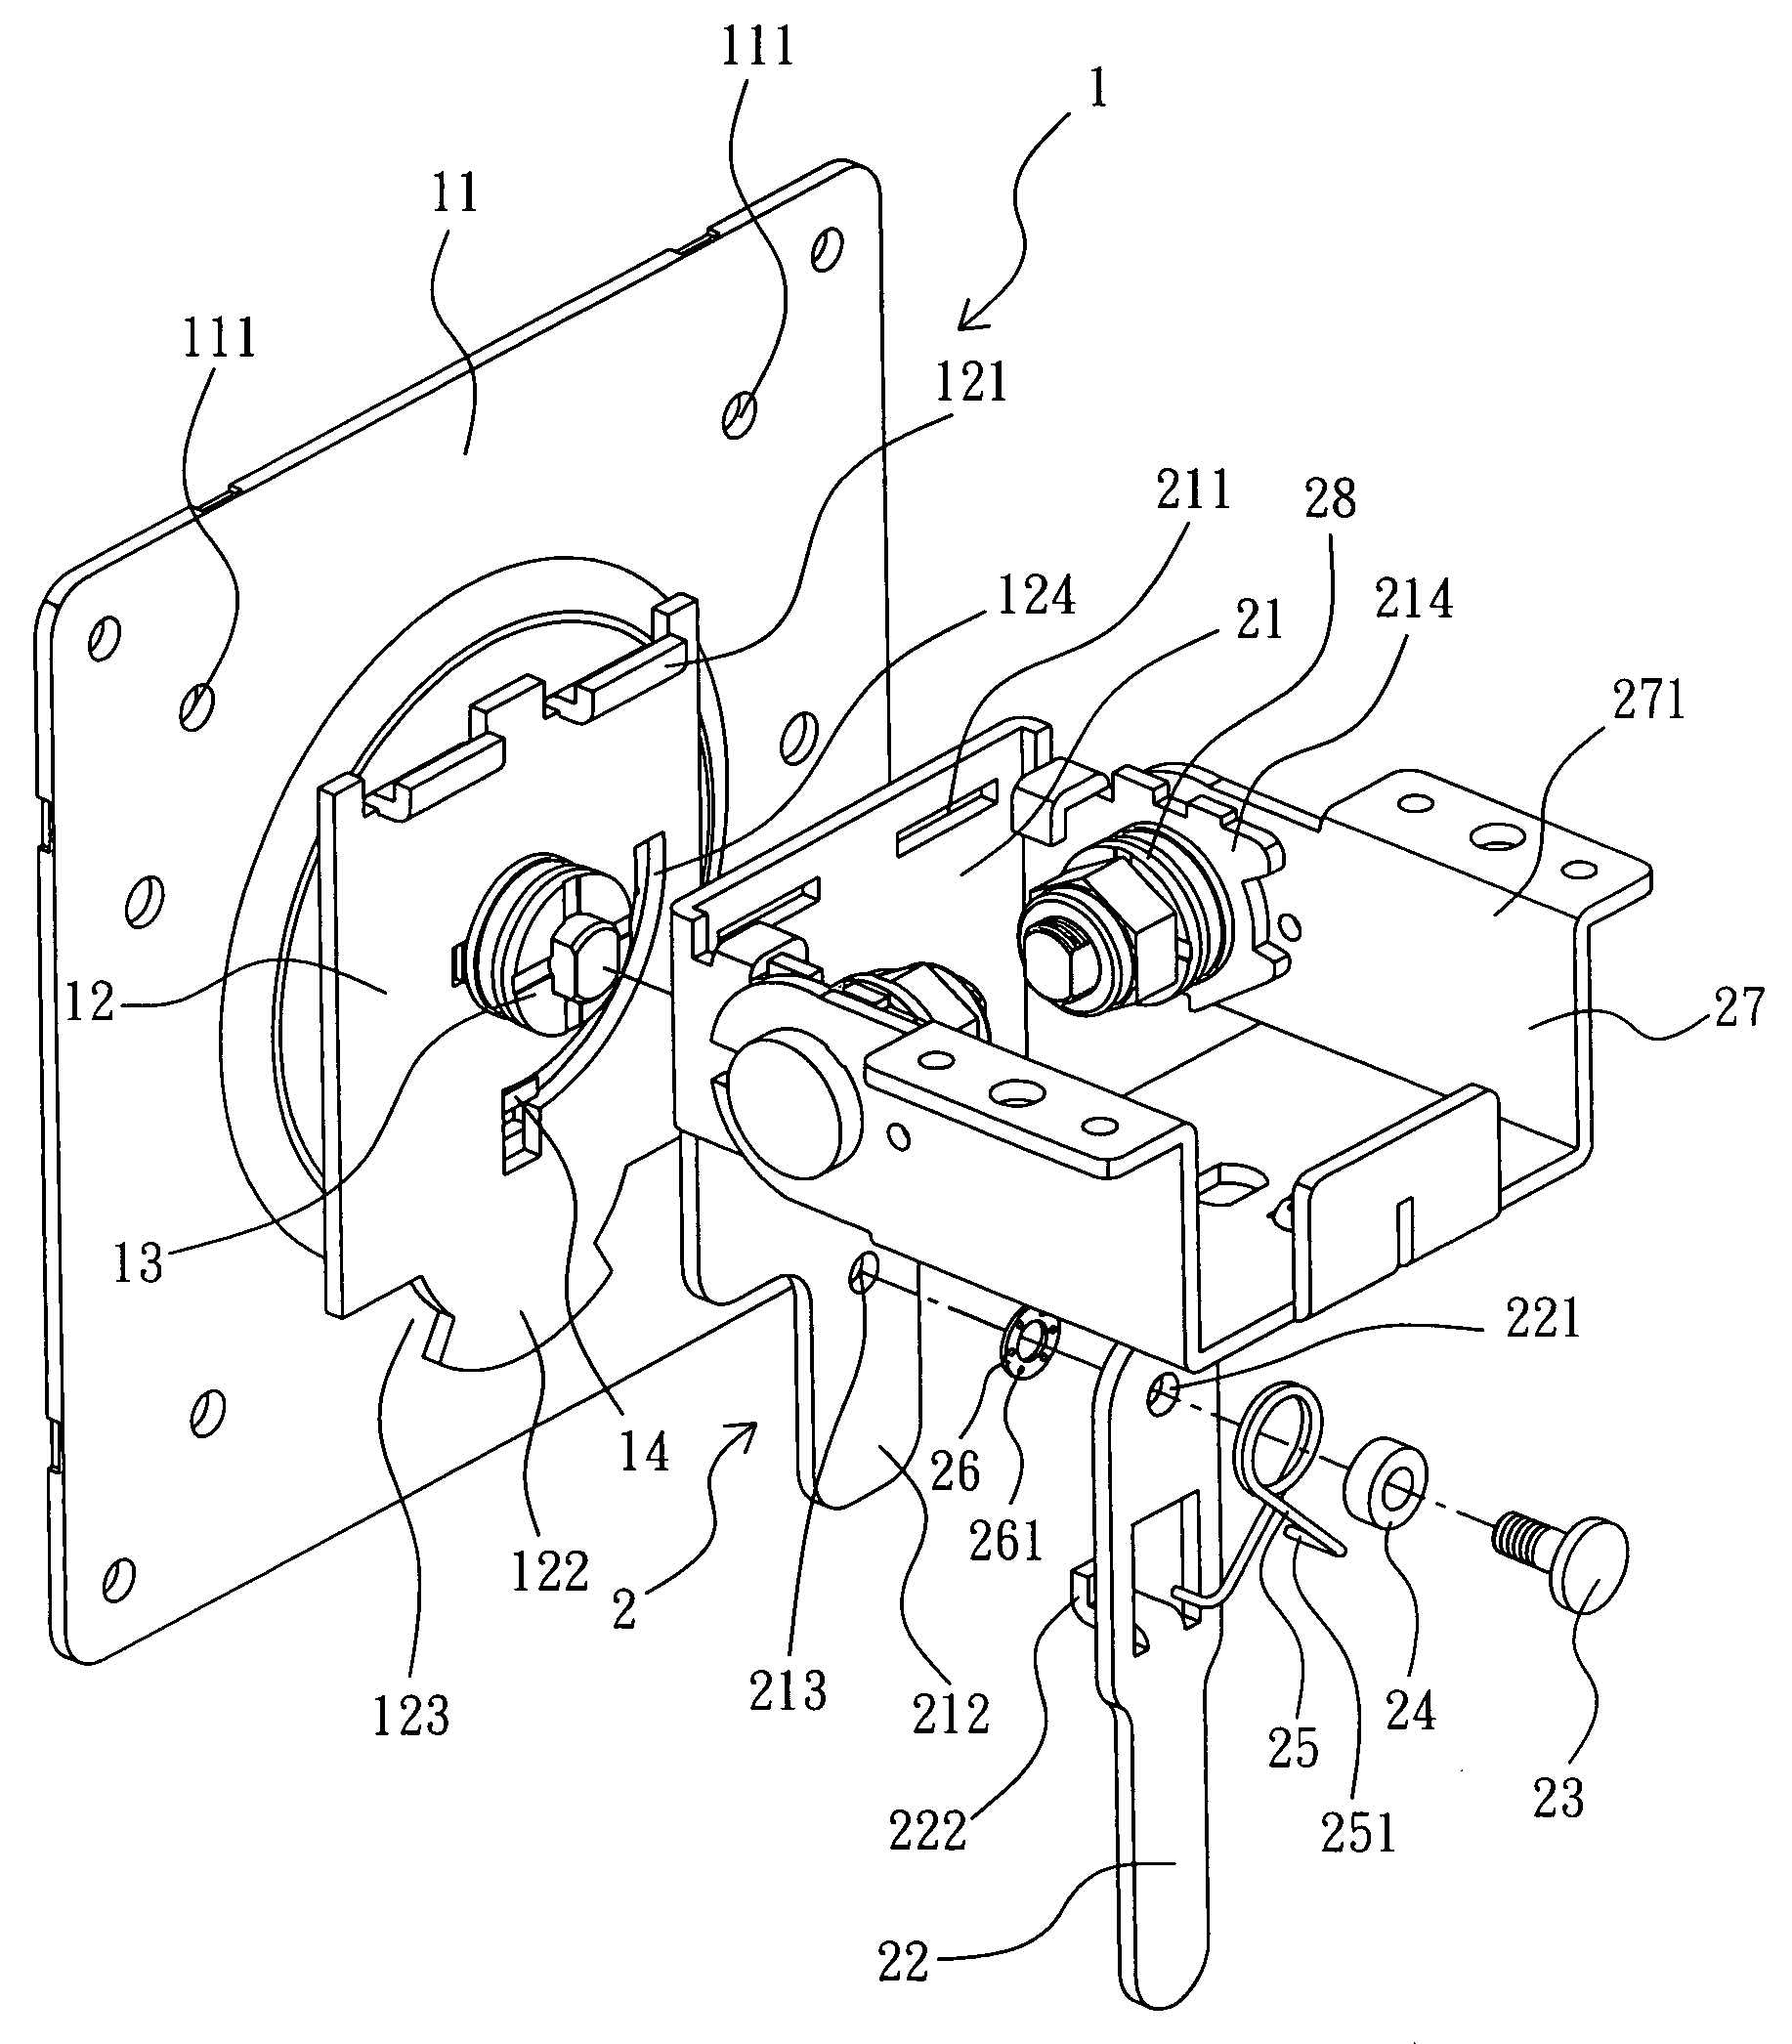 Quick-detachable mounting assembly